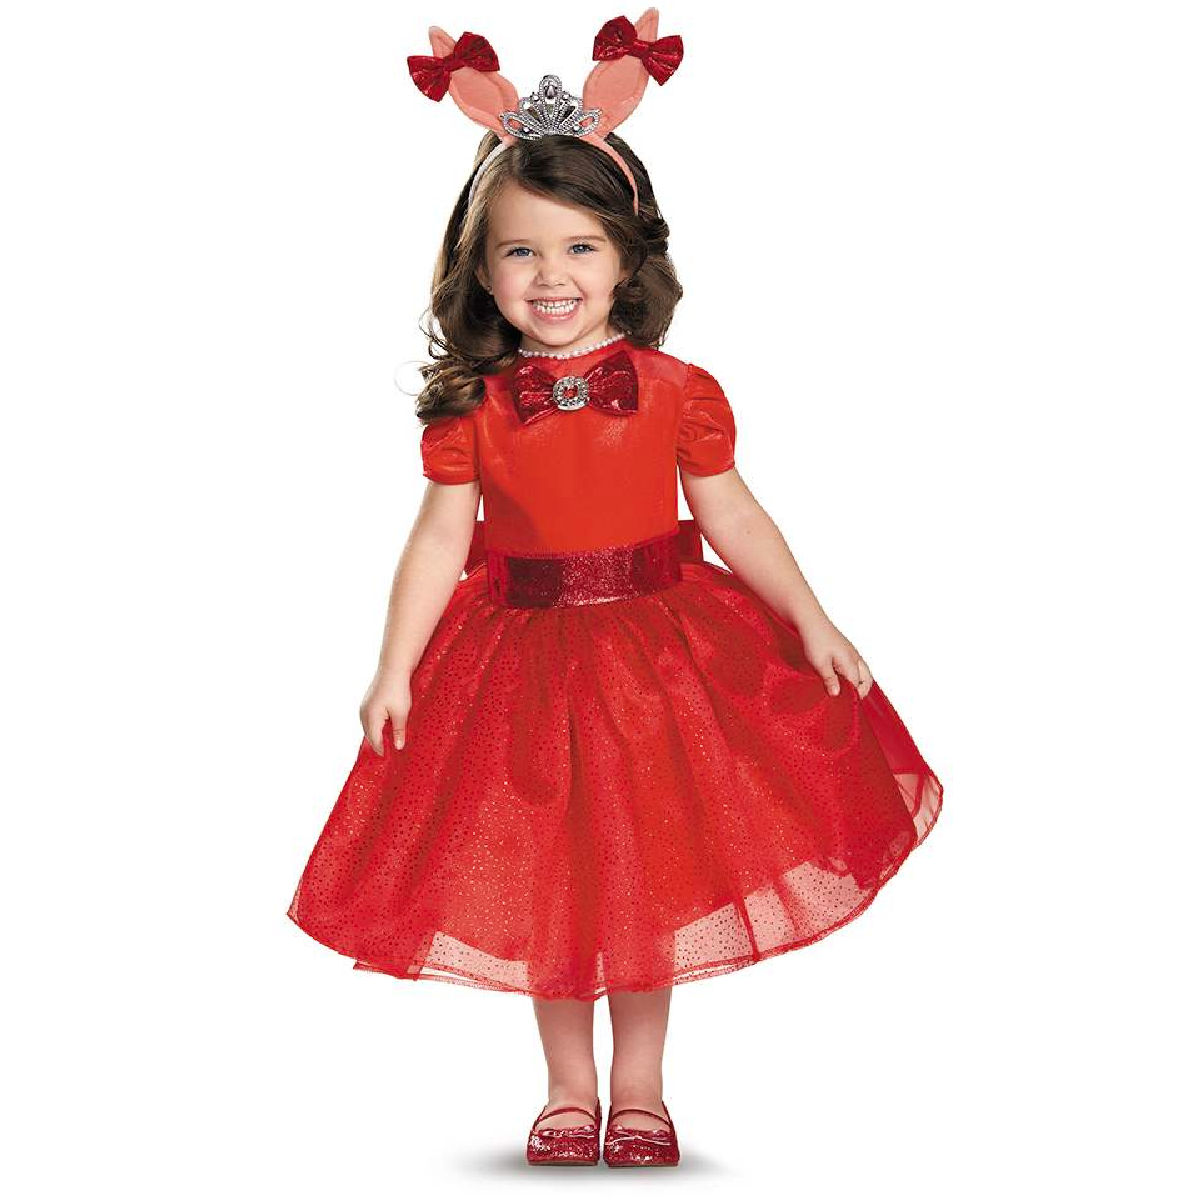 Olivia Rules of Life Deluxe Toddler Costume